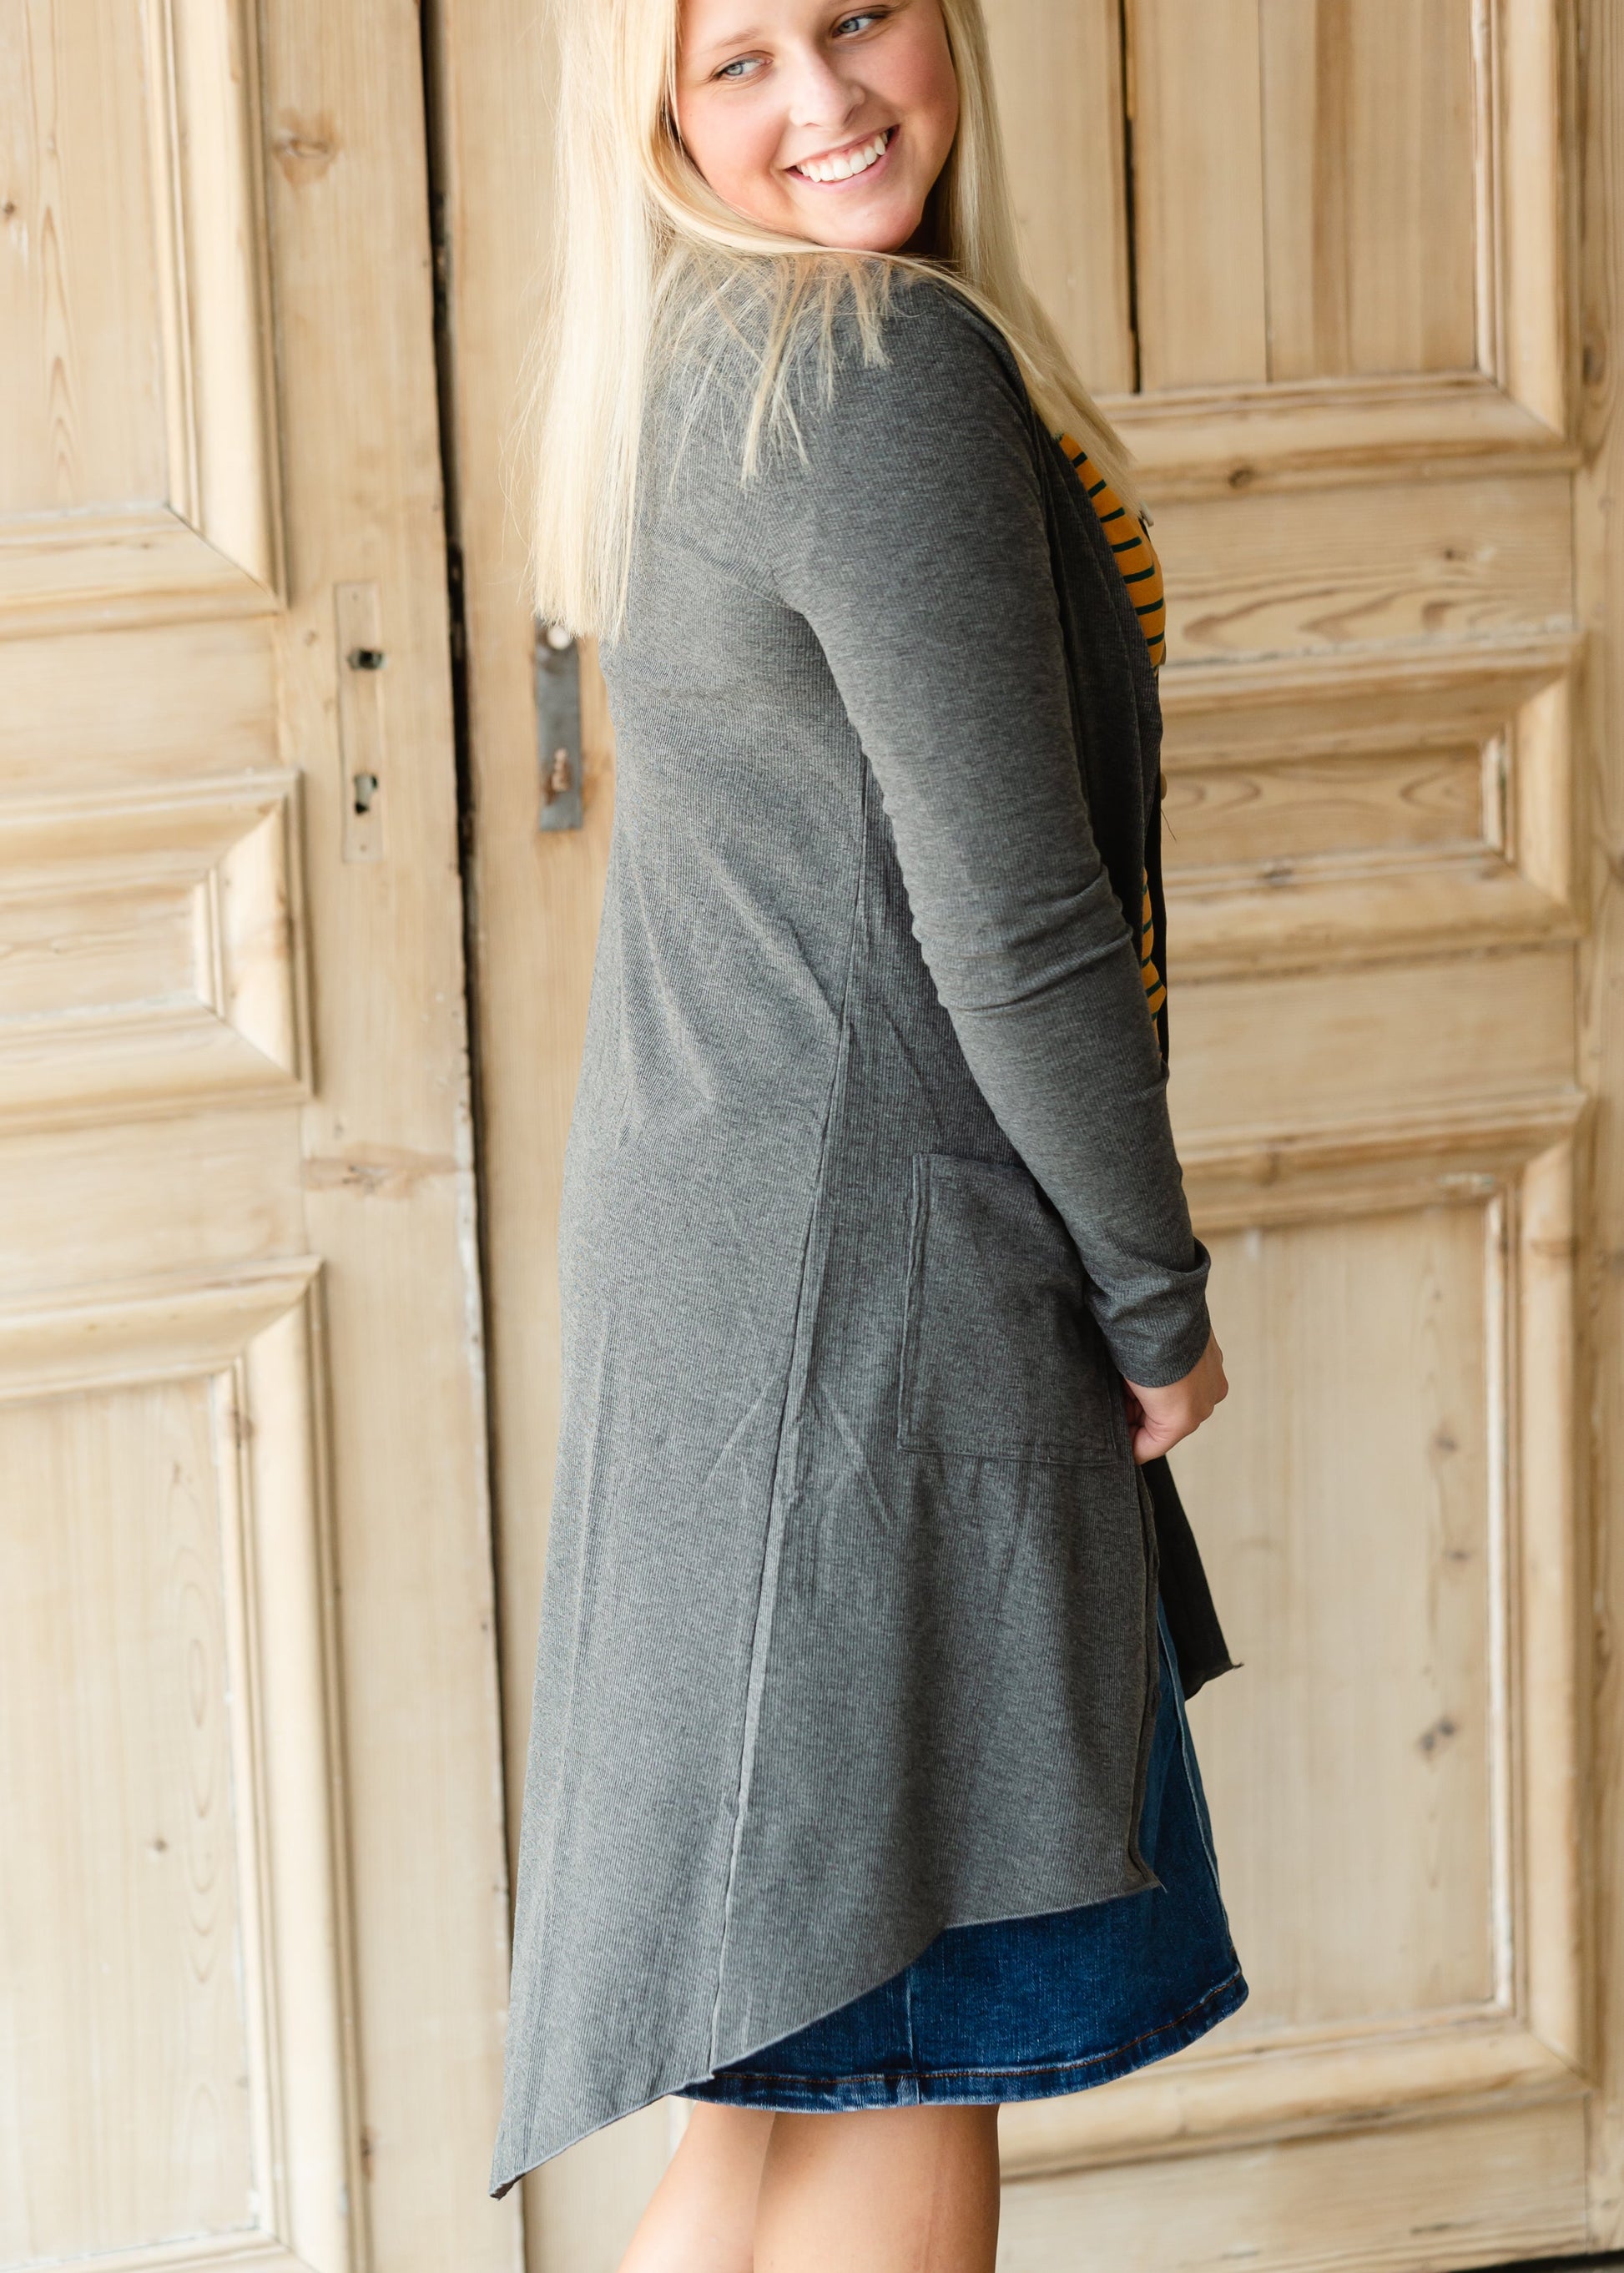 Gray Button Front Long Cardigan - FINAL SALE Tops